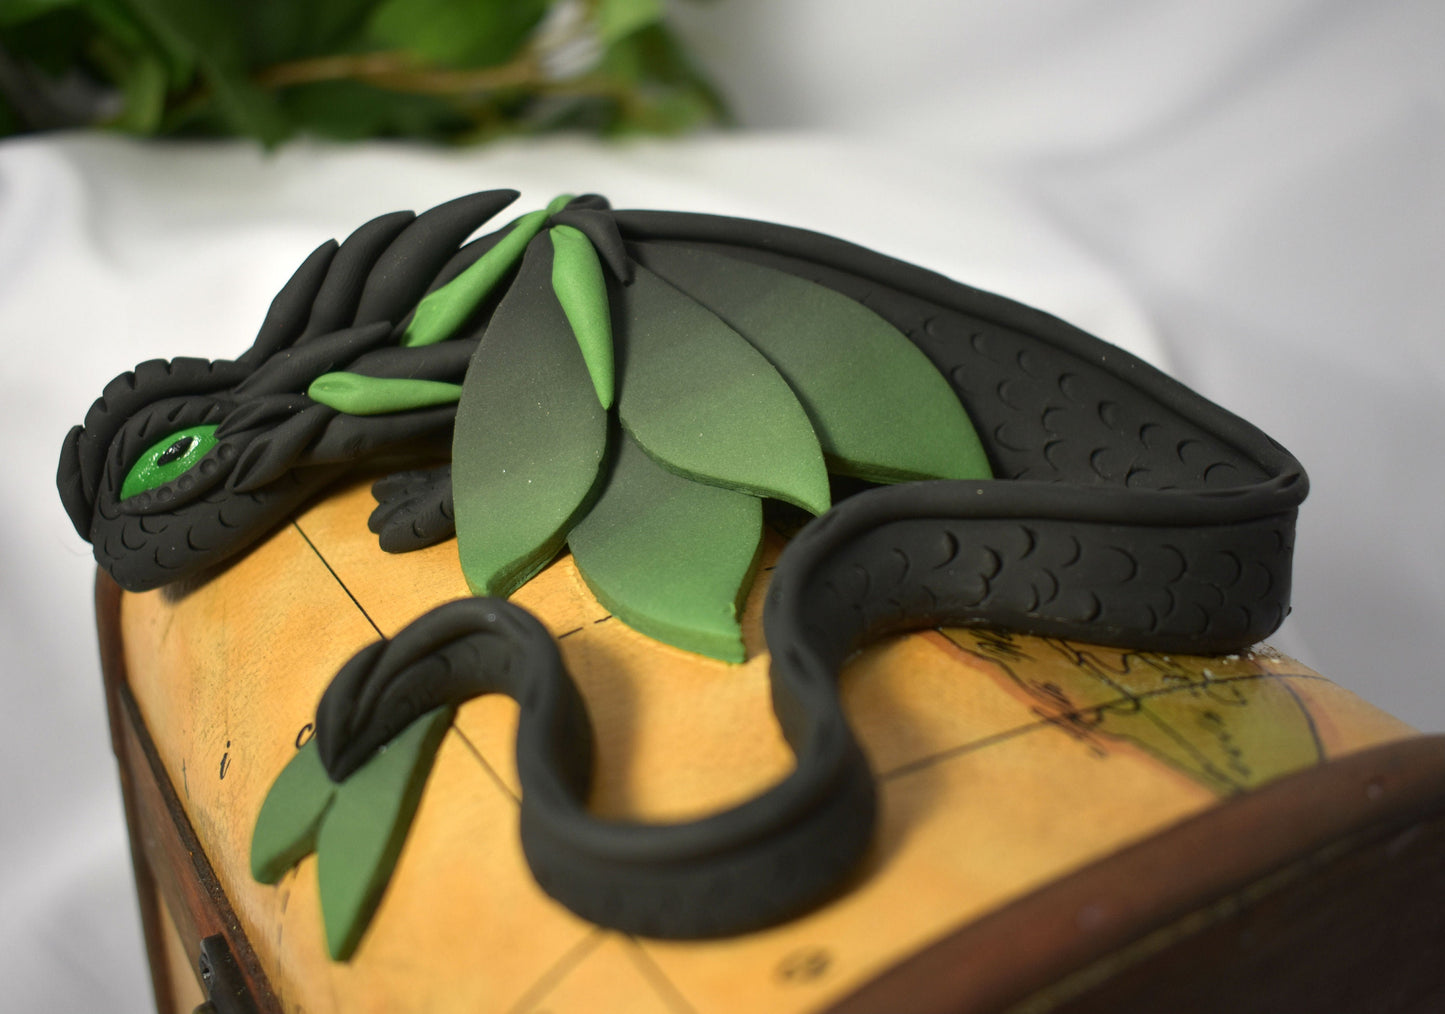 Polymer Clay Black Dragon on Map Chest - 1-111